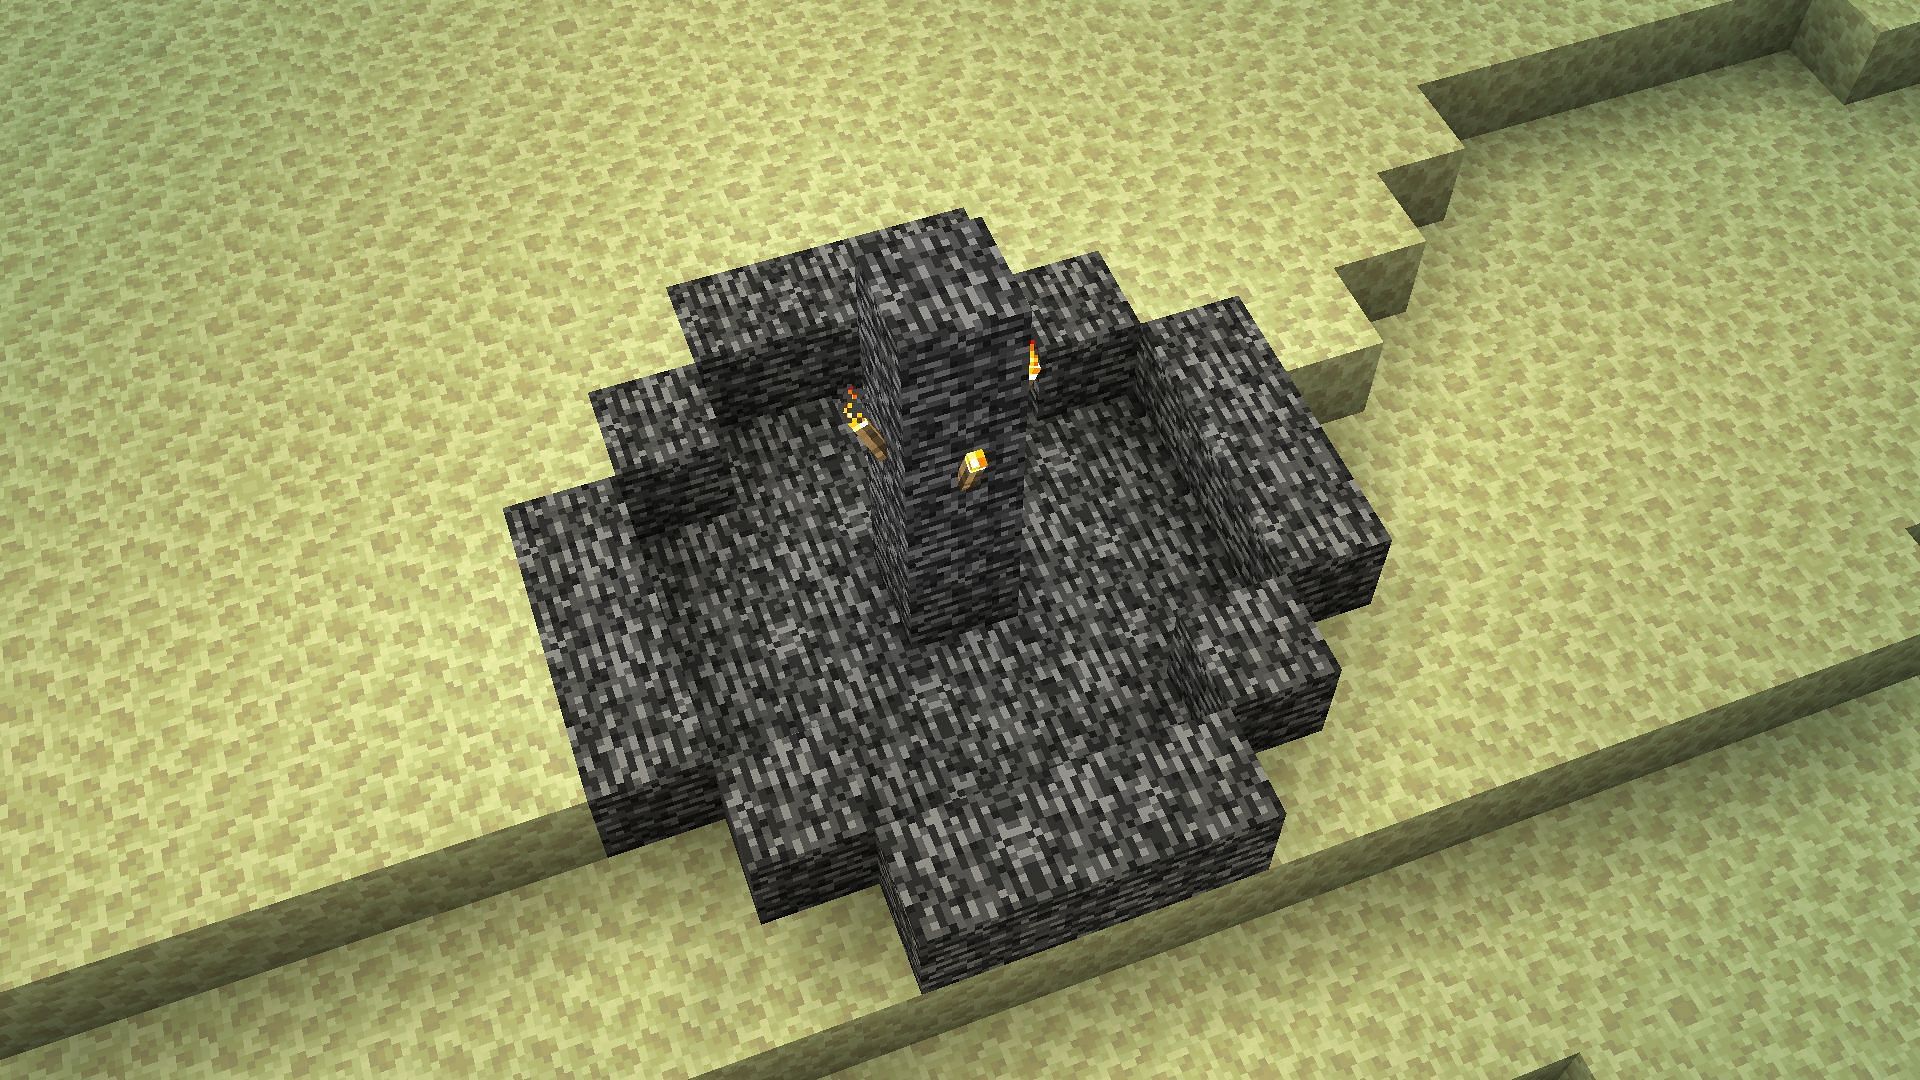 Place four end crystals on the bedrock fountain to summon a new dragon in Minecraft 1.19 world (Image via Mojang)